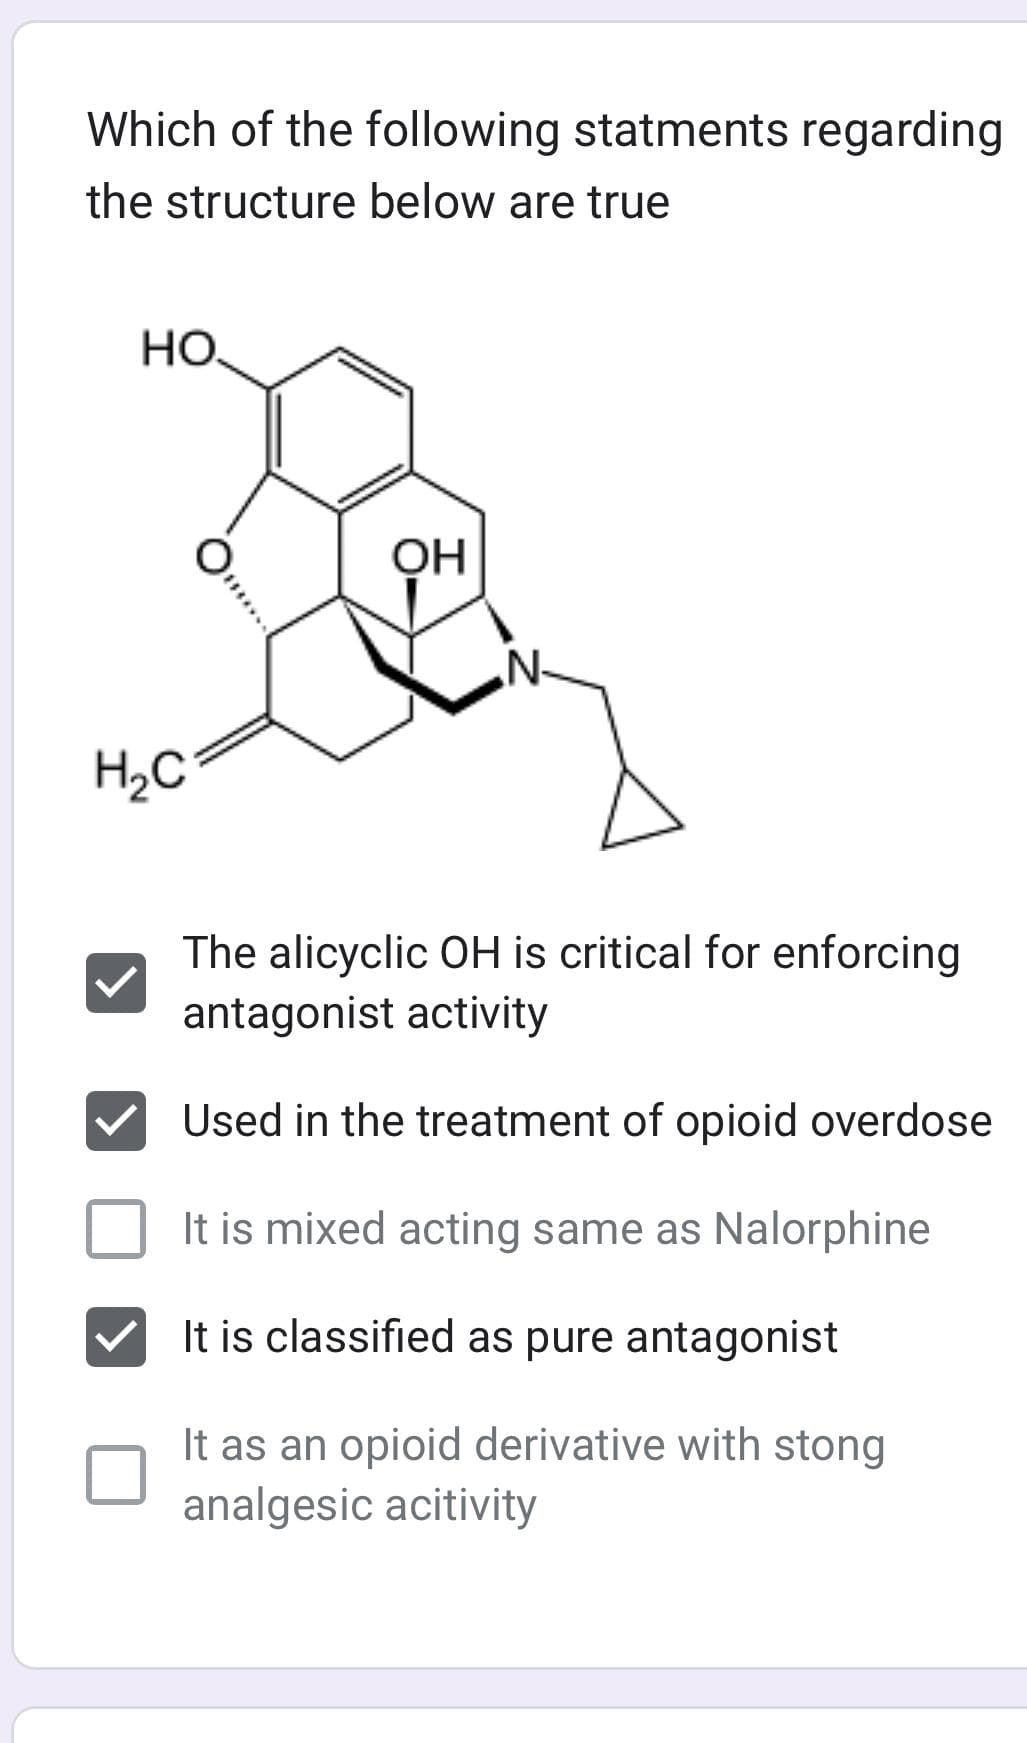 Which of the following statments regarding
the structure below are true
HO.
H₂C
O
OH
N.
The alicyclic OH is critical for enforcing
antagonist activity
Used in the treatment of opioid overdose
It is mixed acting same as Nalorphine
It is classified as pure antagonist
It as an opioid derivative with stong
analgesic acitivity